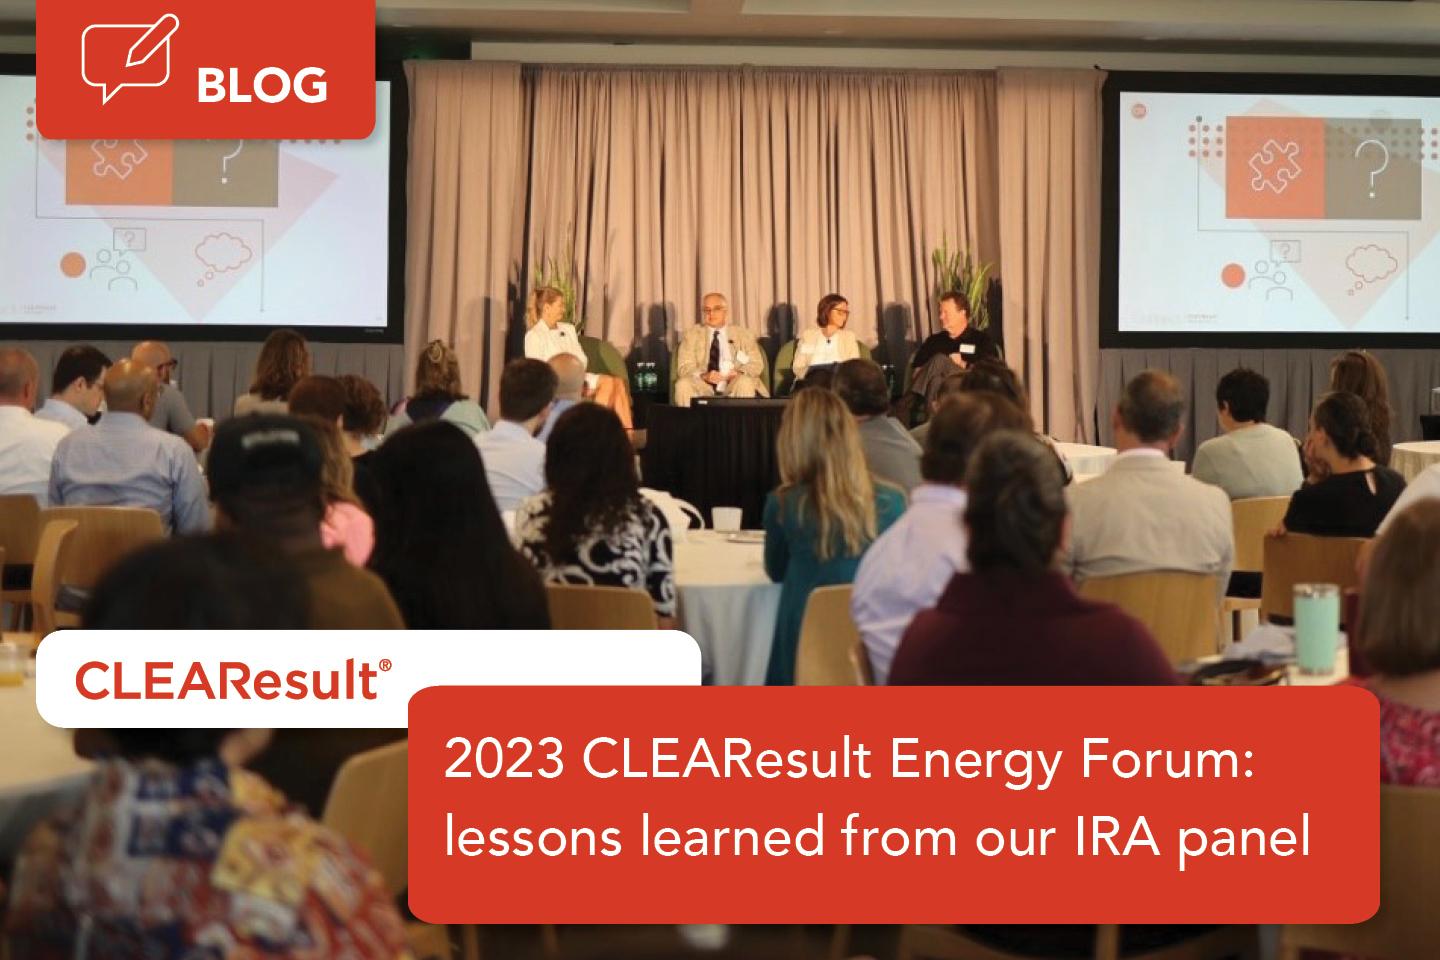 Lessons learned at the 2023 CLEAResult Energy Forum Inflation Reduction Act keynote panel 